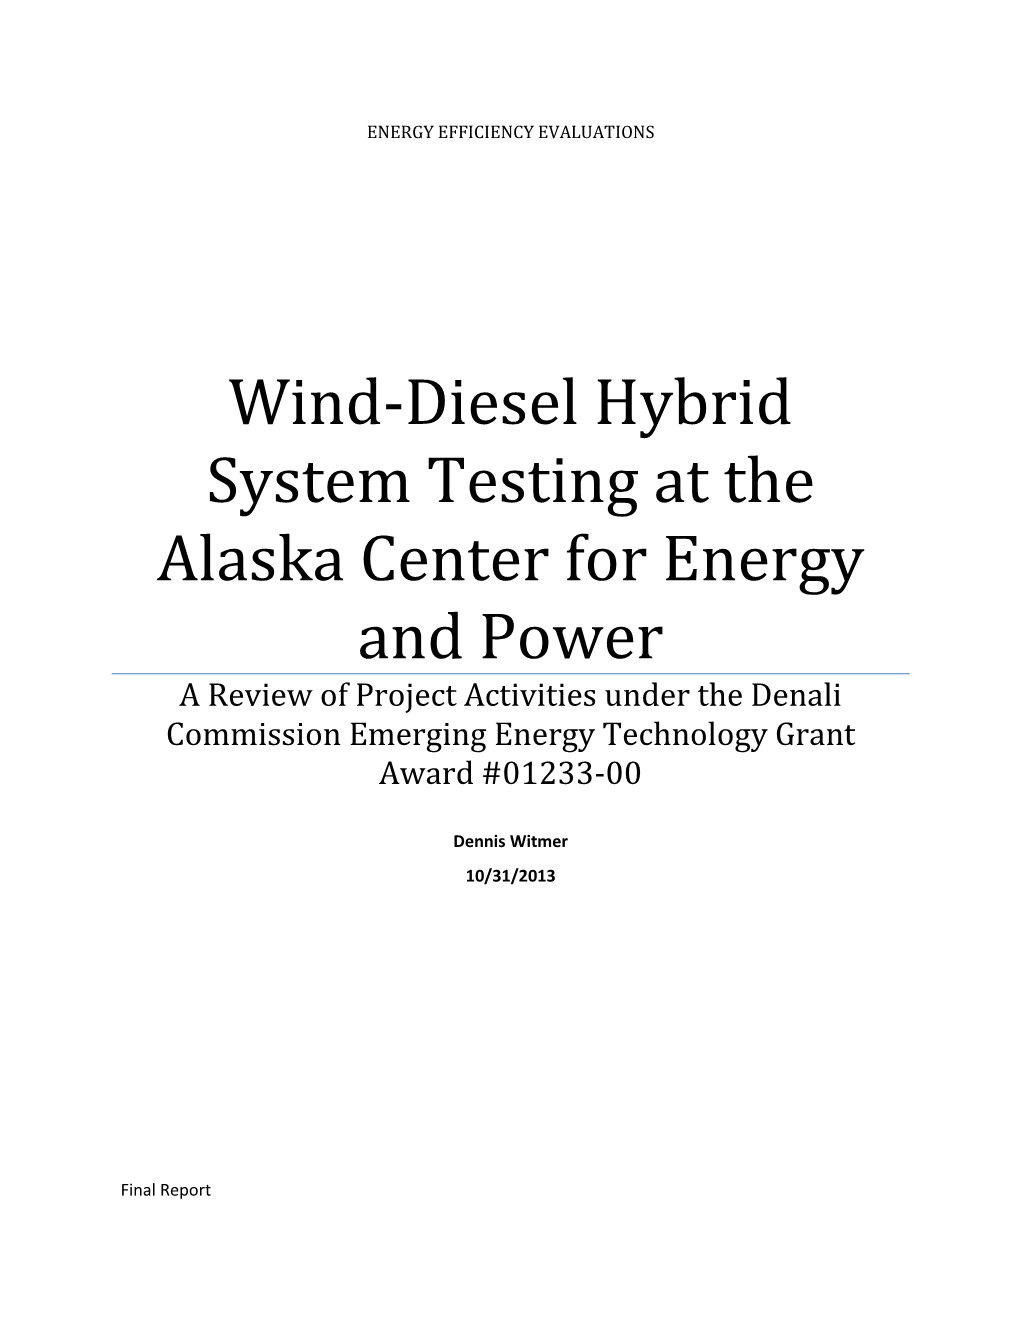 Wind-Diesel Hybrid System Testing at the Alaska Center for Energy And